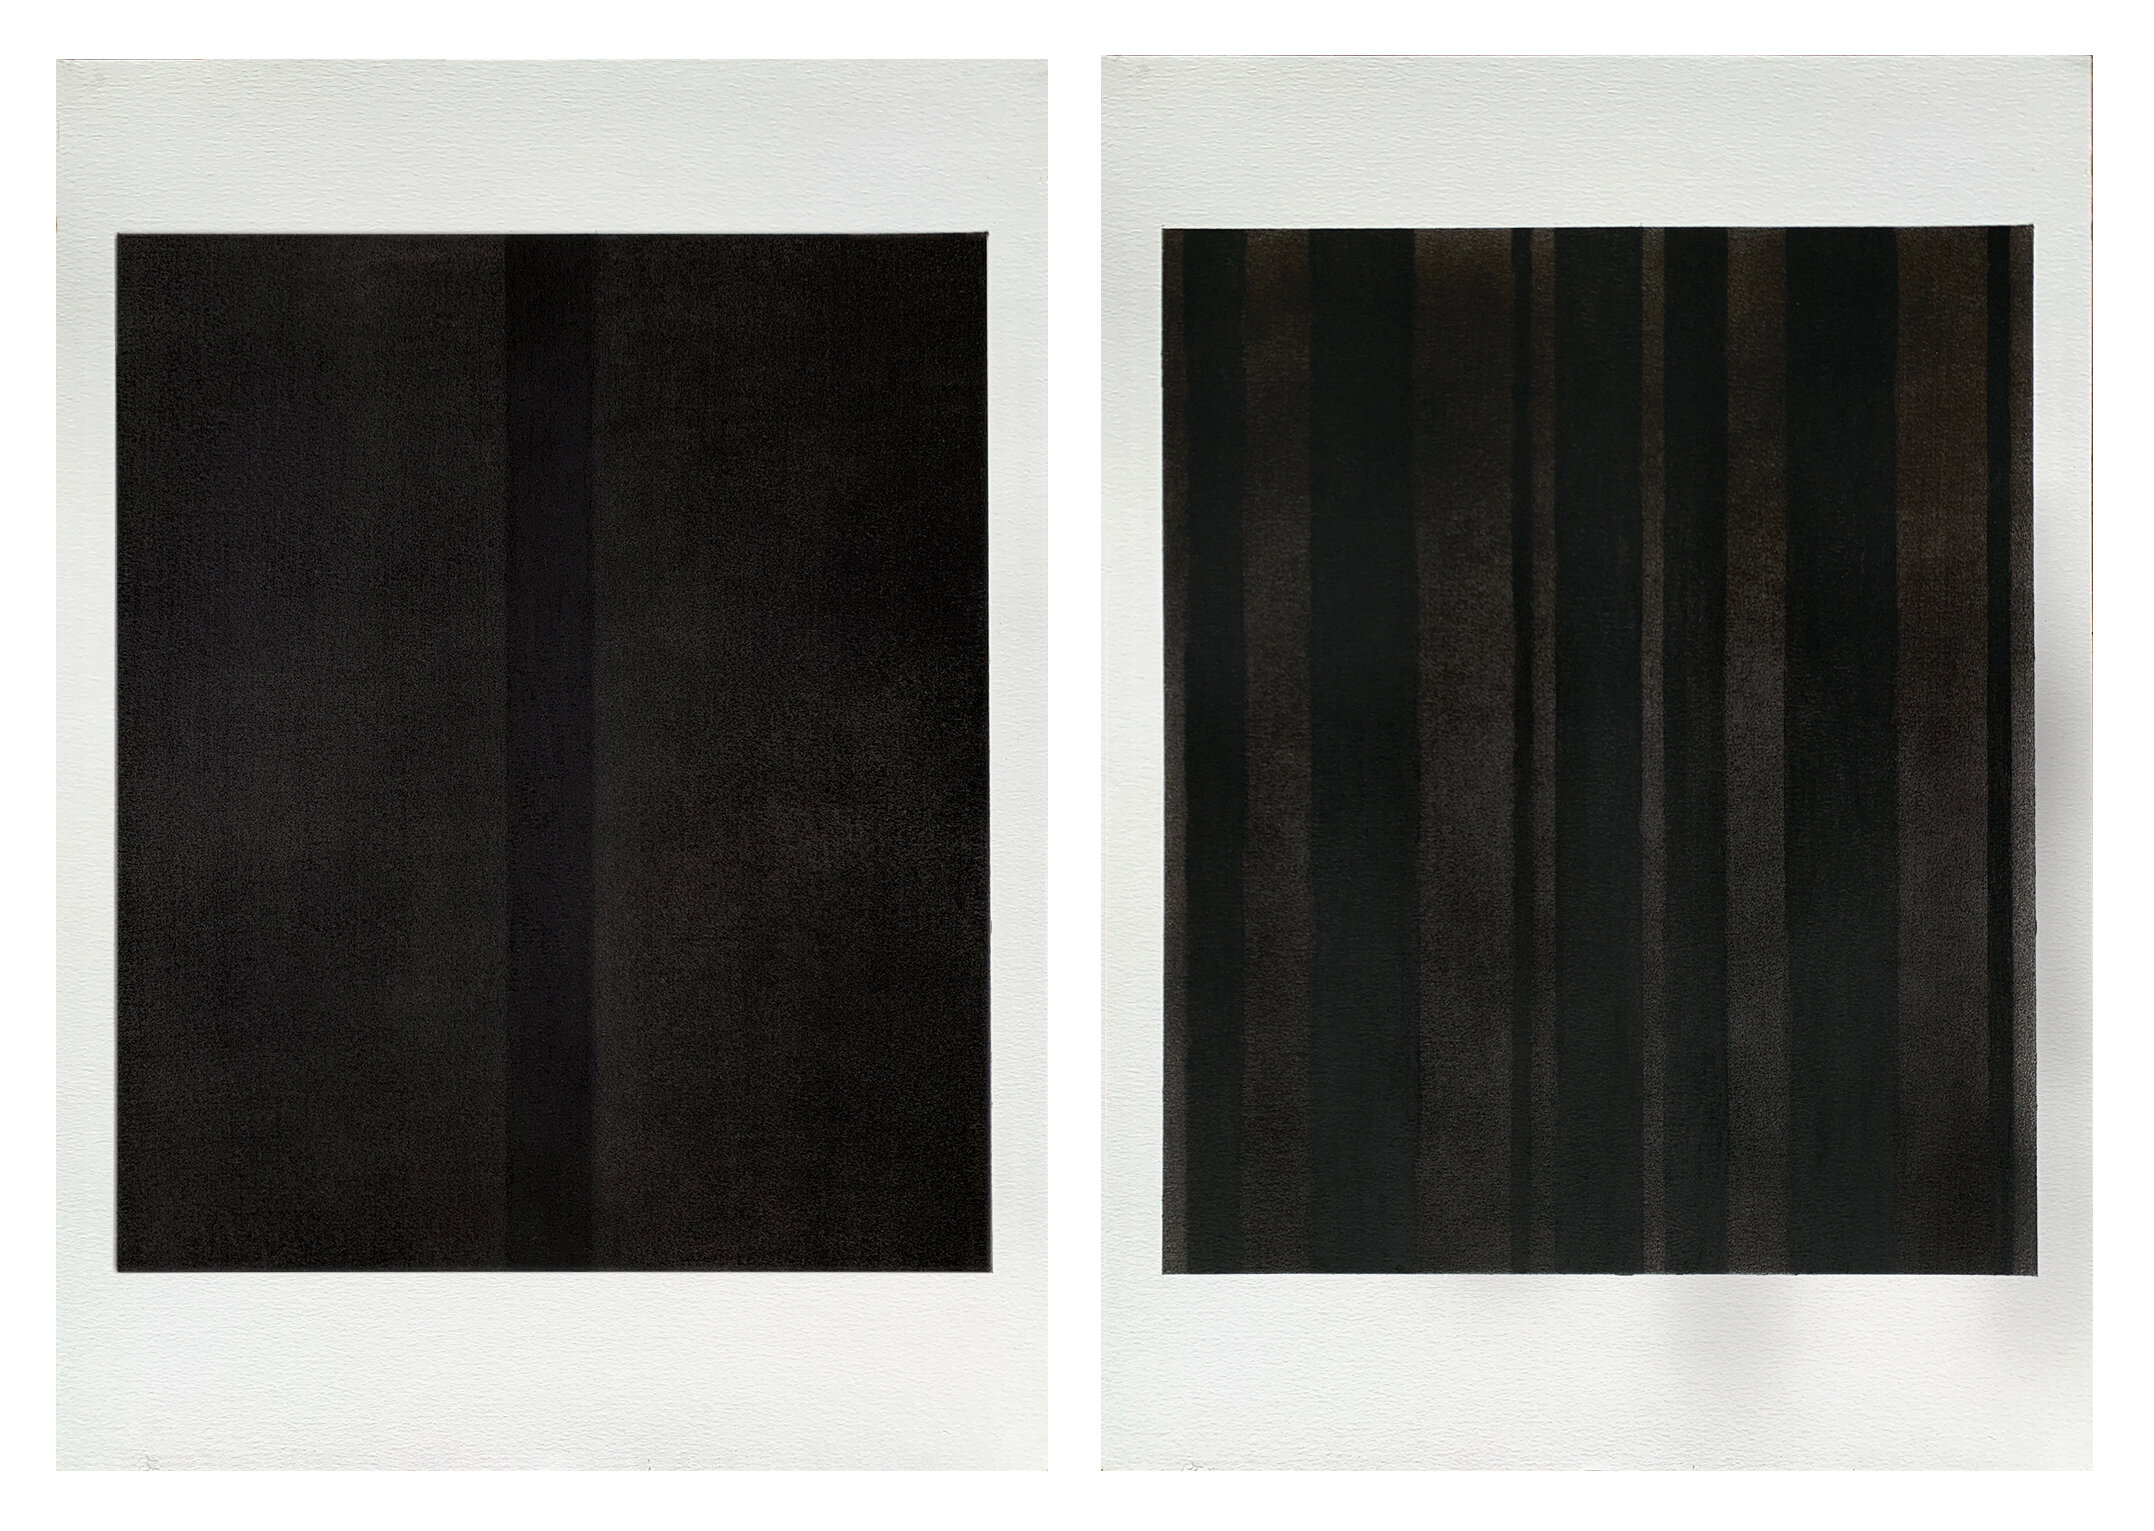 Abraham and Canto IV. (After Barnett Newman ) 1949, 1963